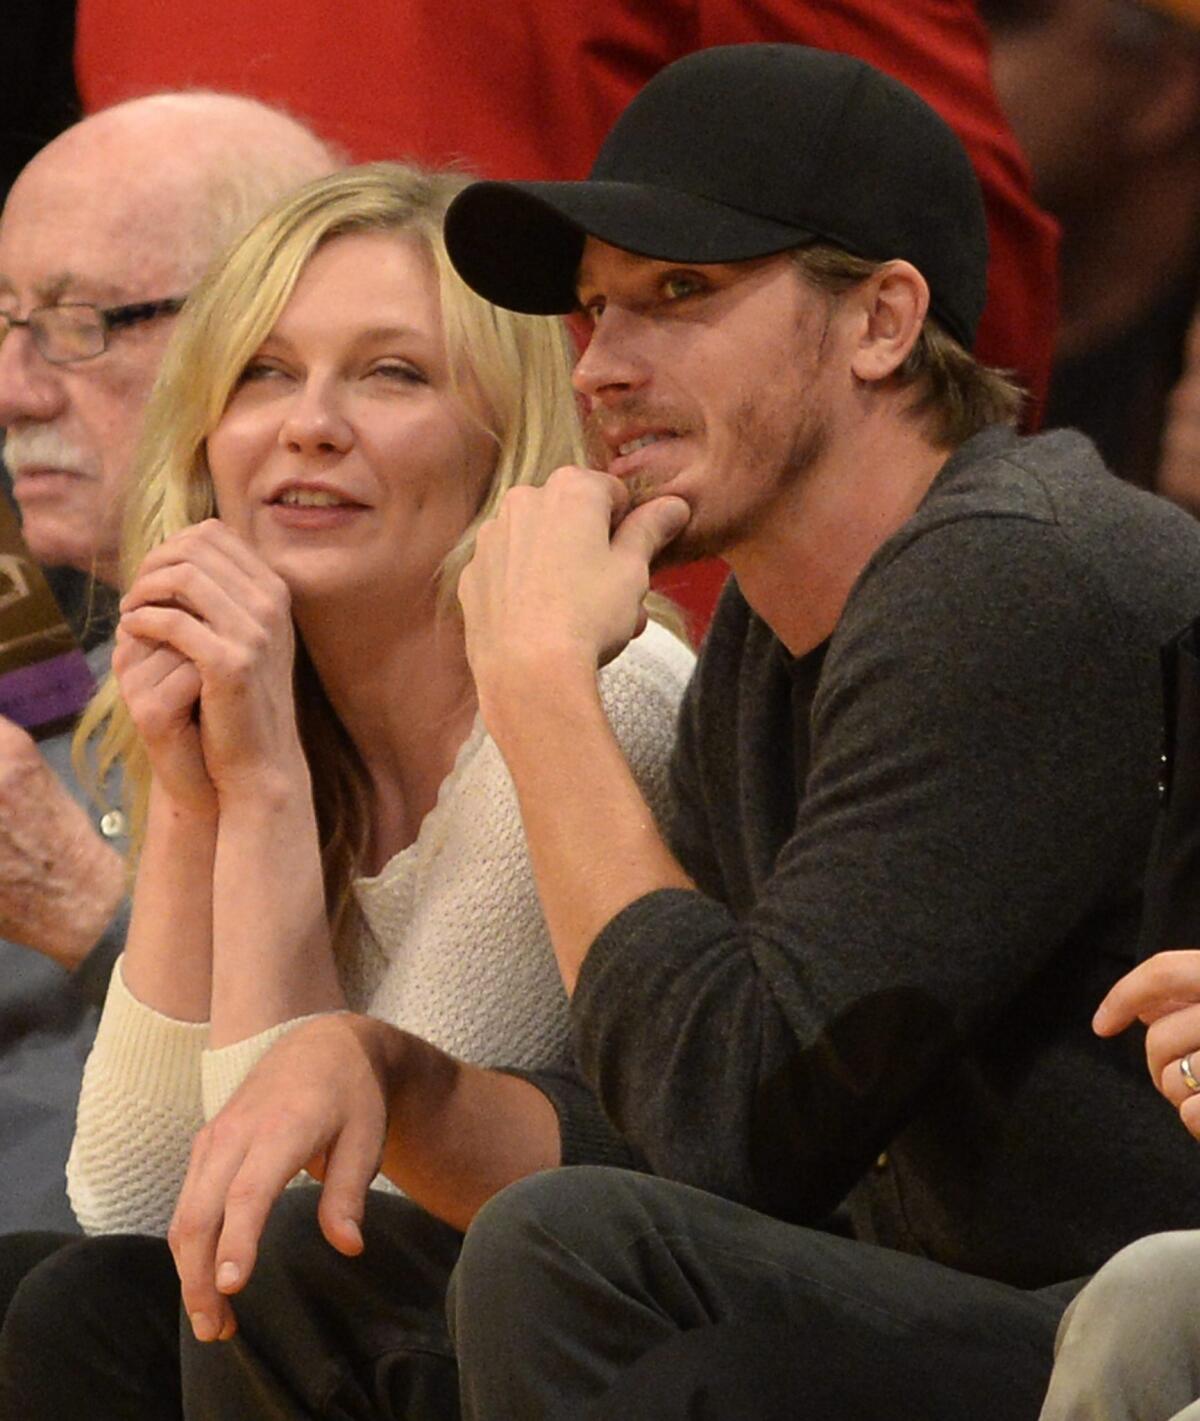 Kirsten Dunst is seen at a Lakers game with actor Garrett Hedlund at Staples Center.